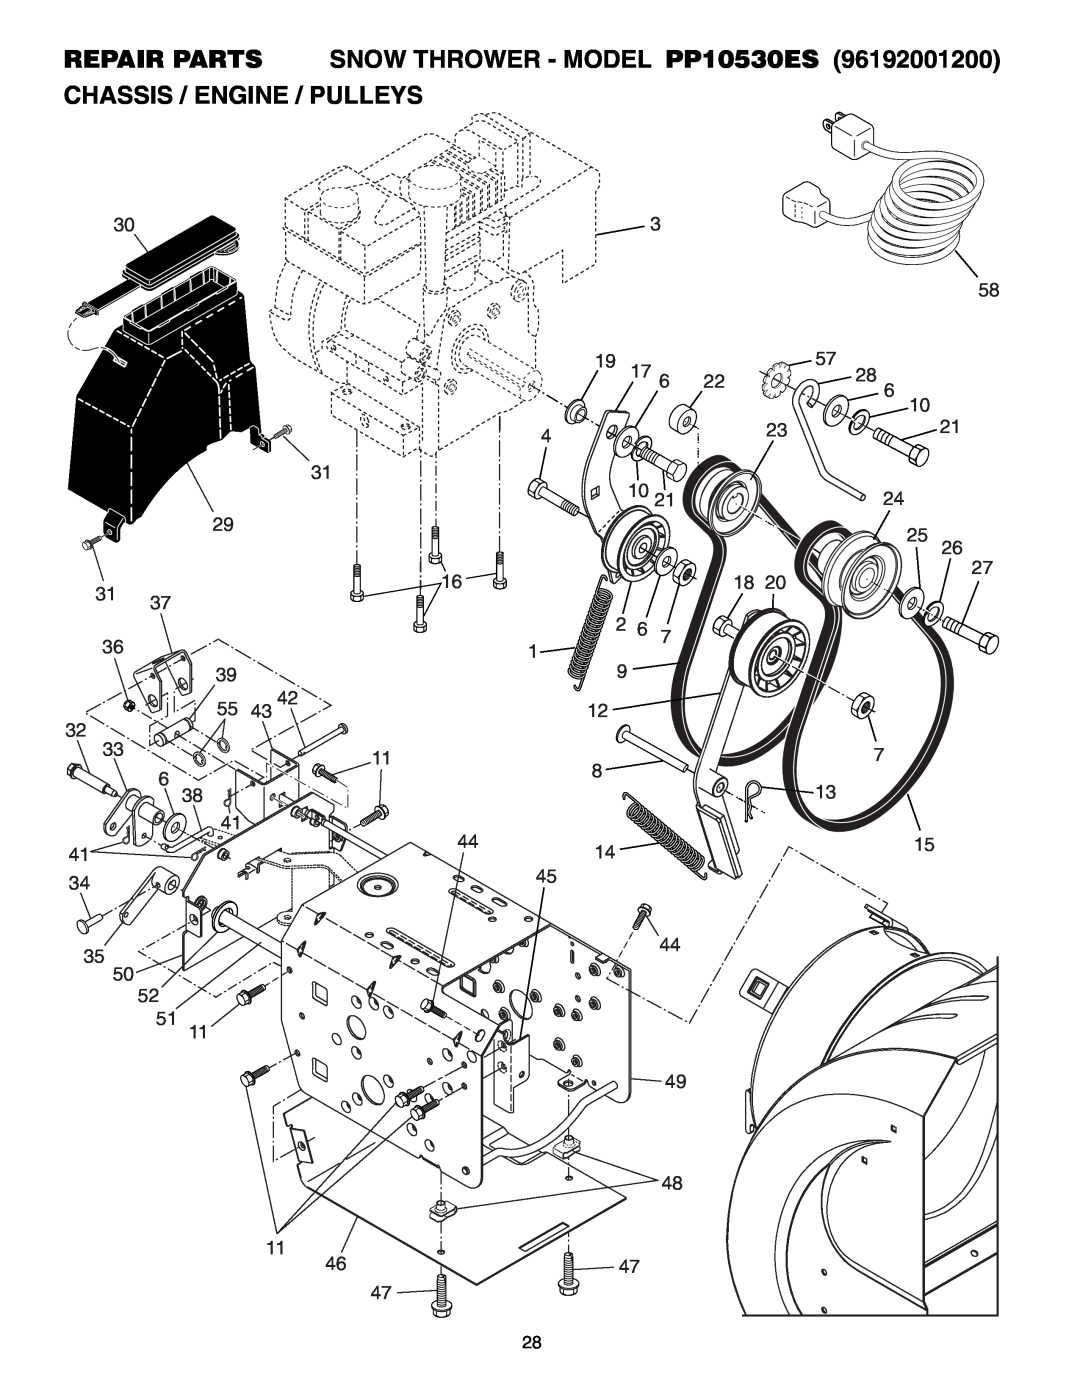 Poulan owner manual Chassis / Engine / Pulleys, REPAIR PARTS SNOW THROWER - MODEL PP10530ES 